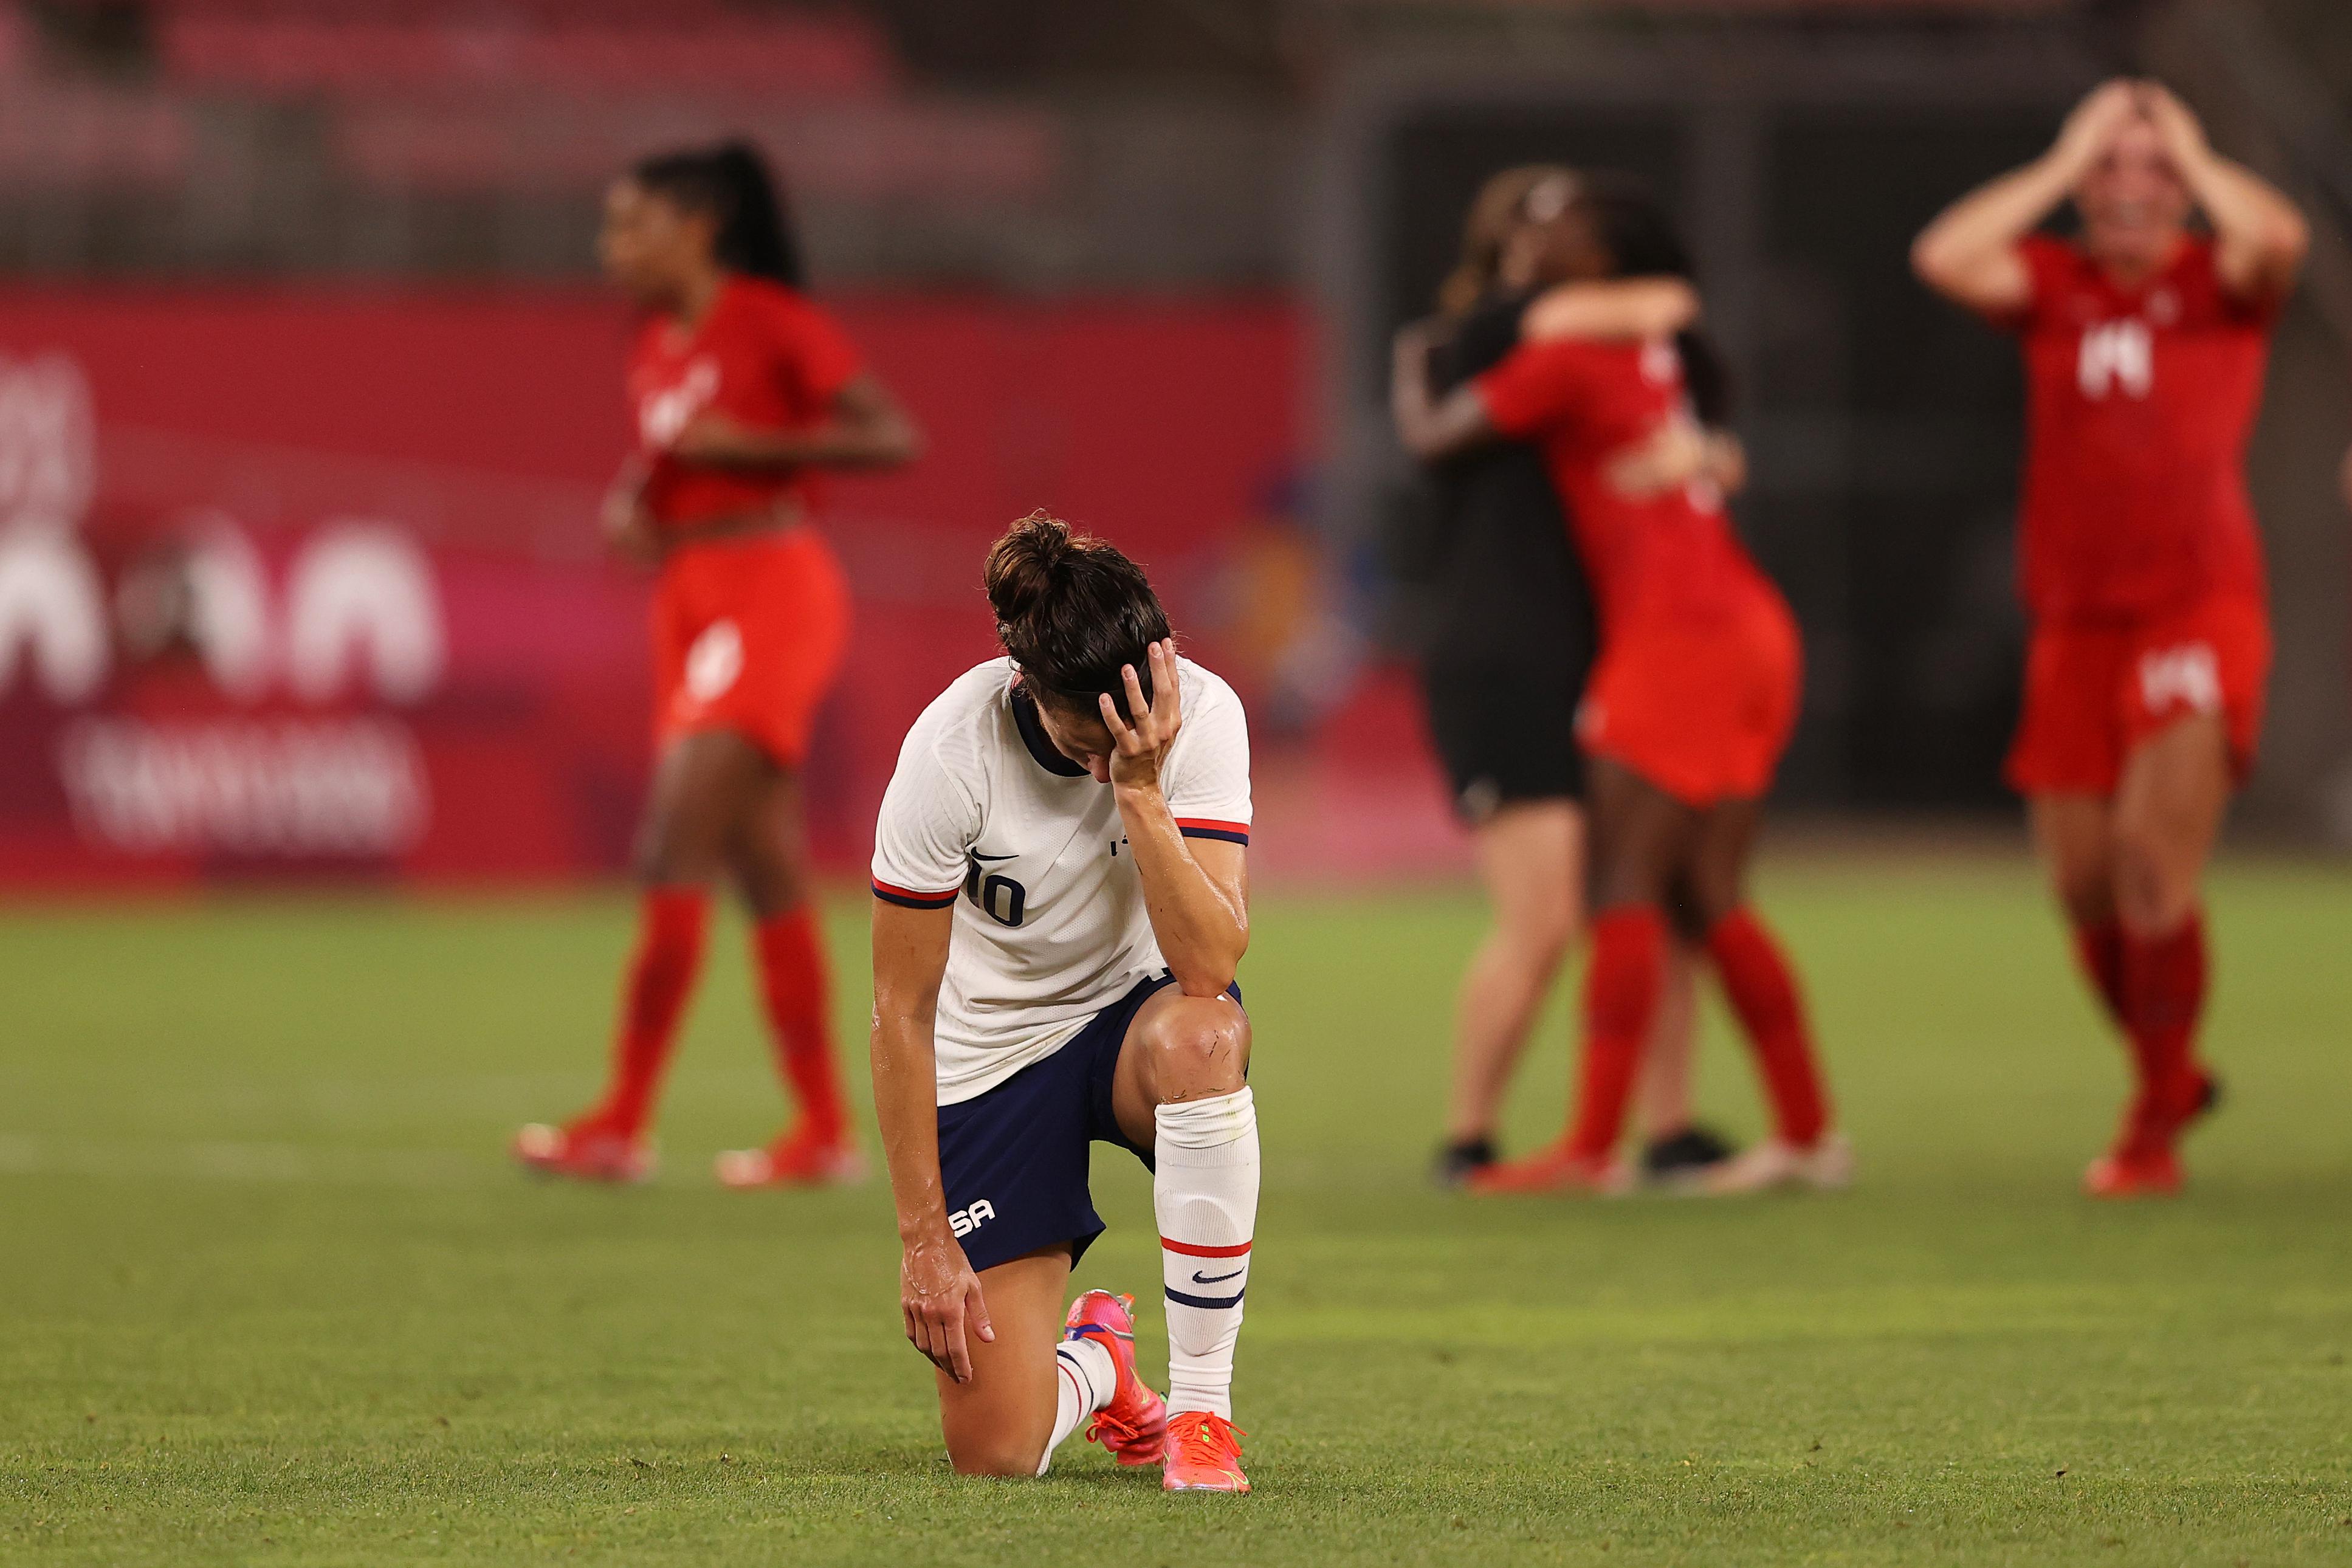 Lloyd on one knee with her head in her hand, looking dejected, as Canadian players celebrate behind her.